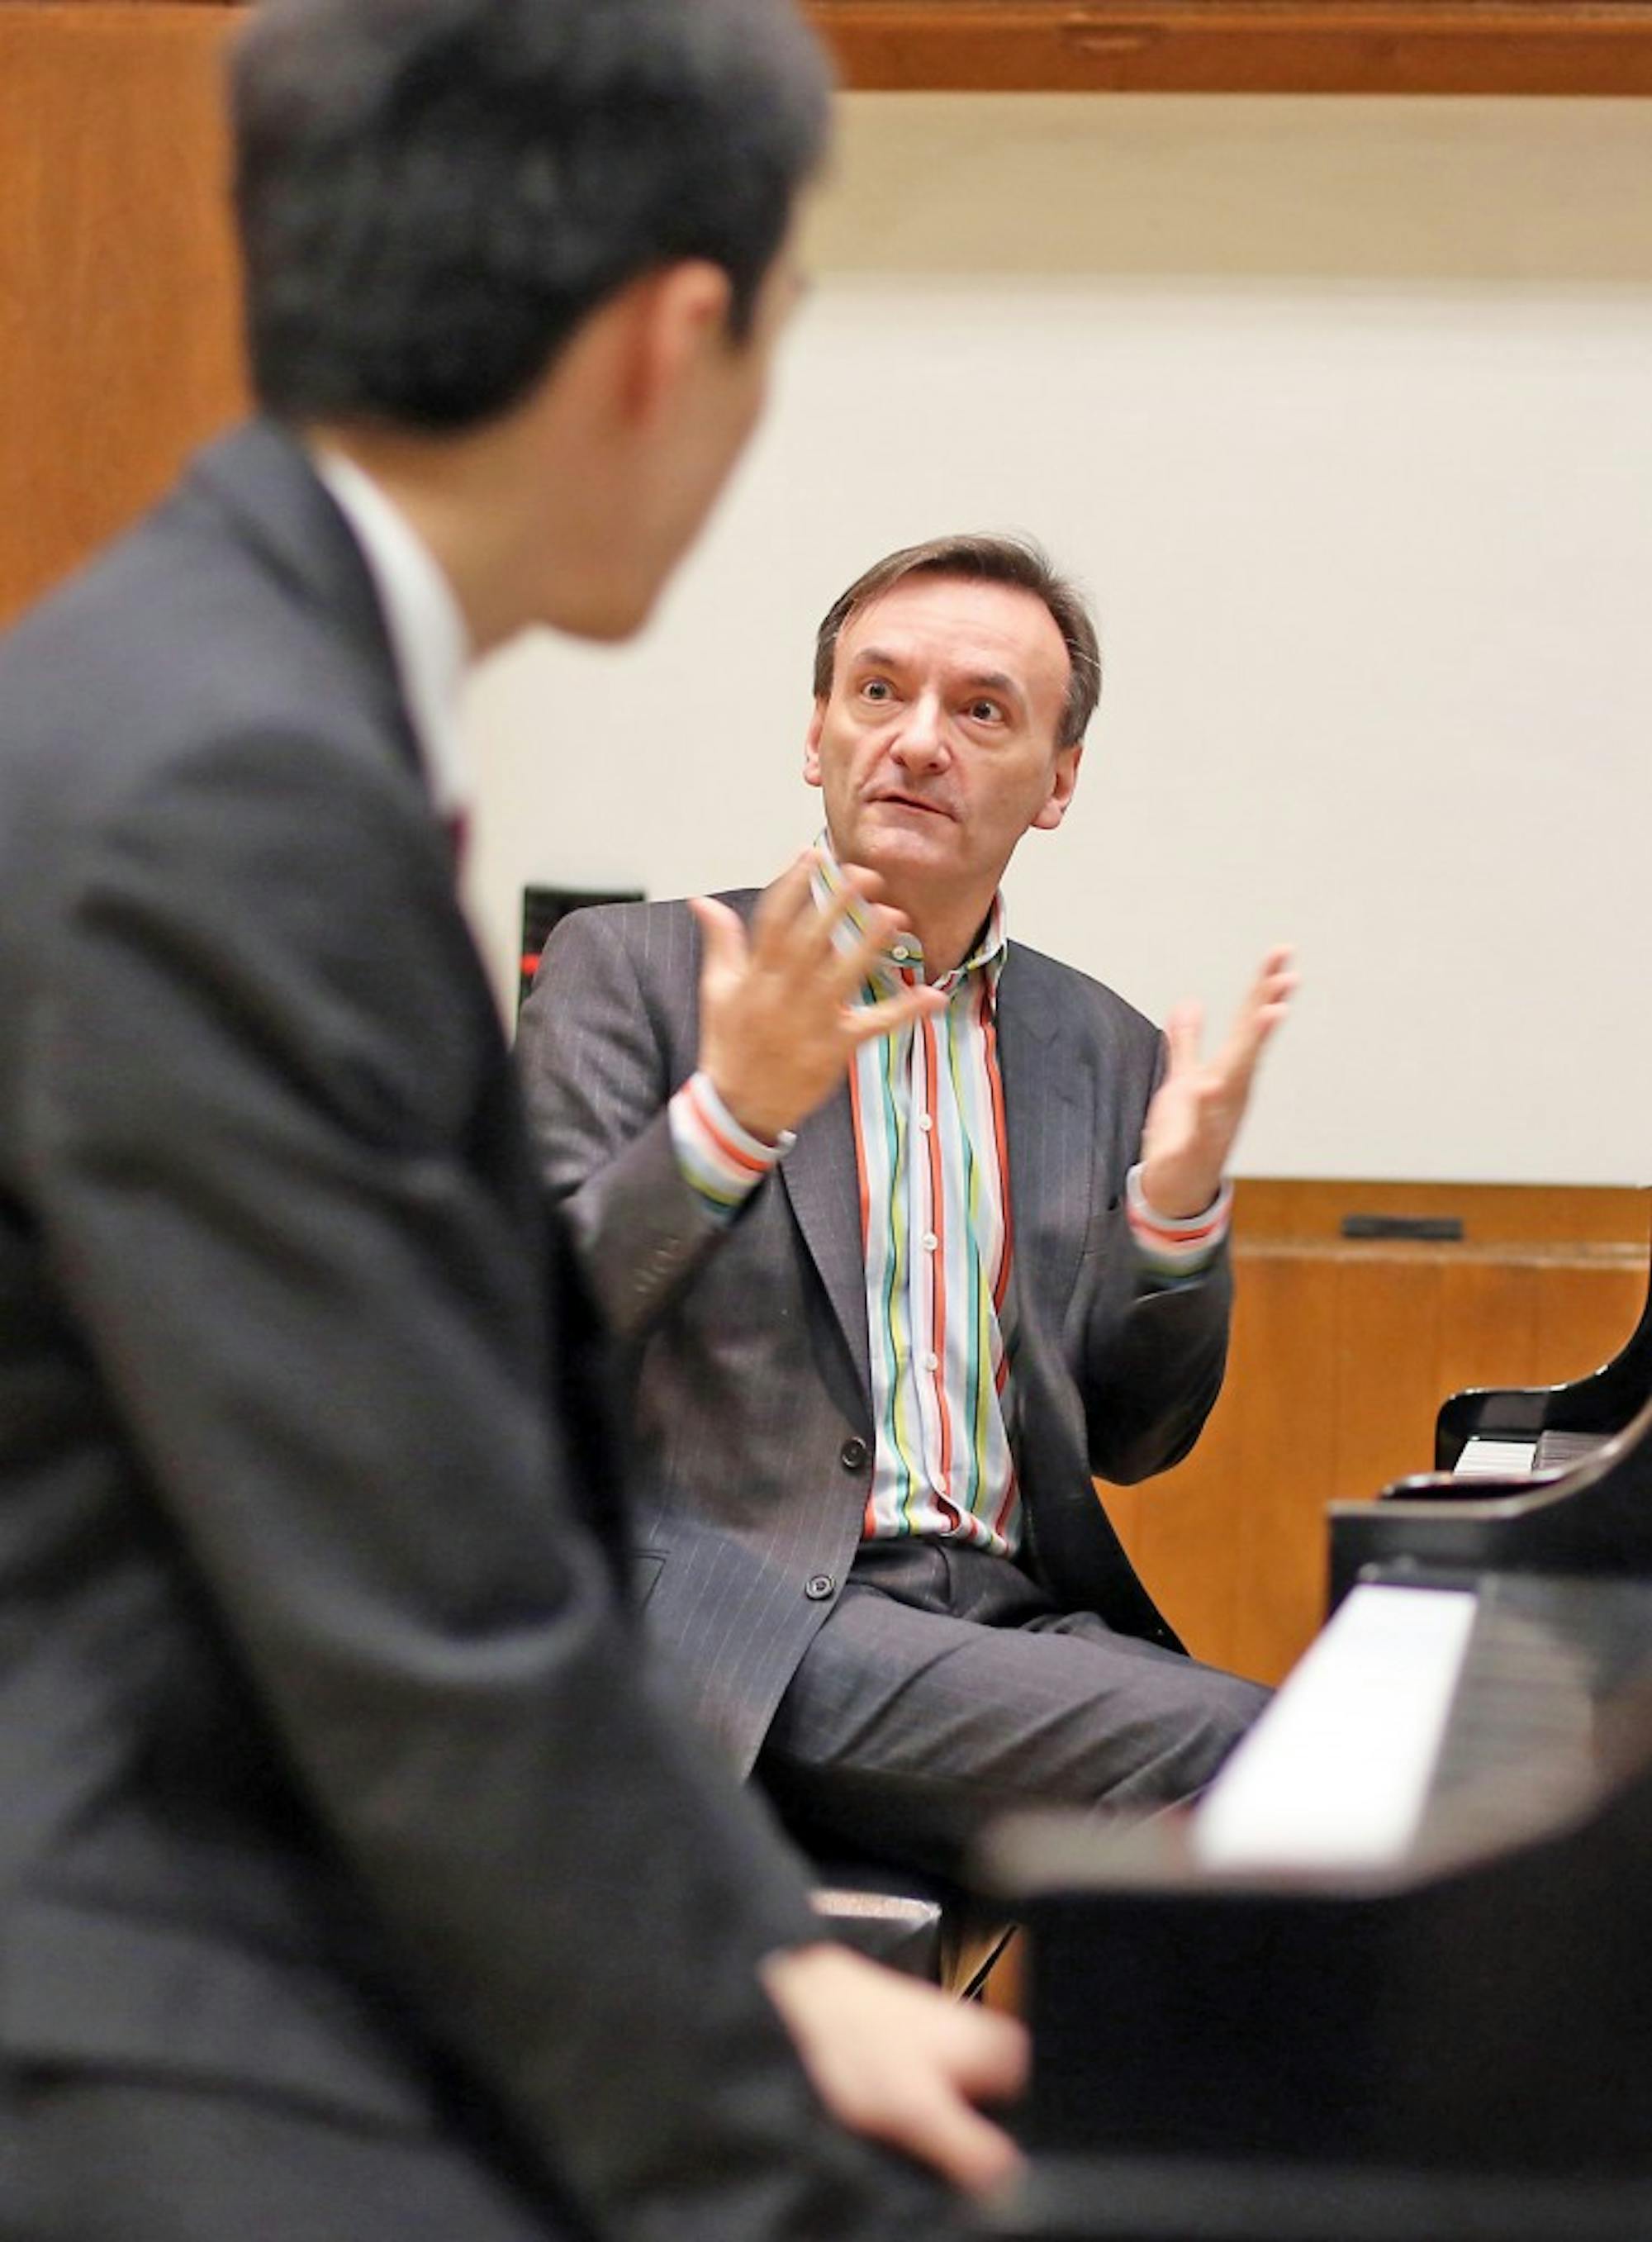 Stephen Hough (right) leads a piano master class with student Andrew Liu in Faulkner Auditorium at the Hopkins Center for the Arts in  Hanover, New Hampshire on Friday, January 22, 2016. 

Copyright 2016 Rob Strong